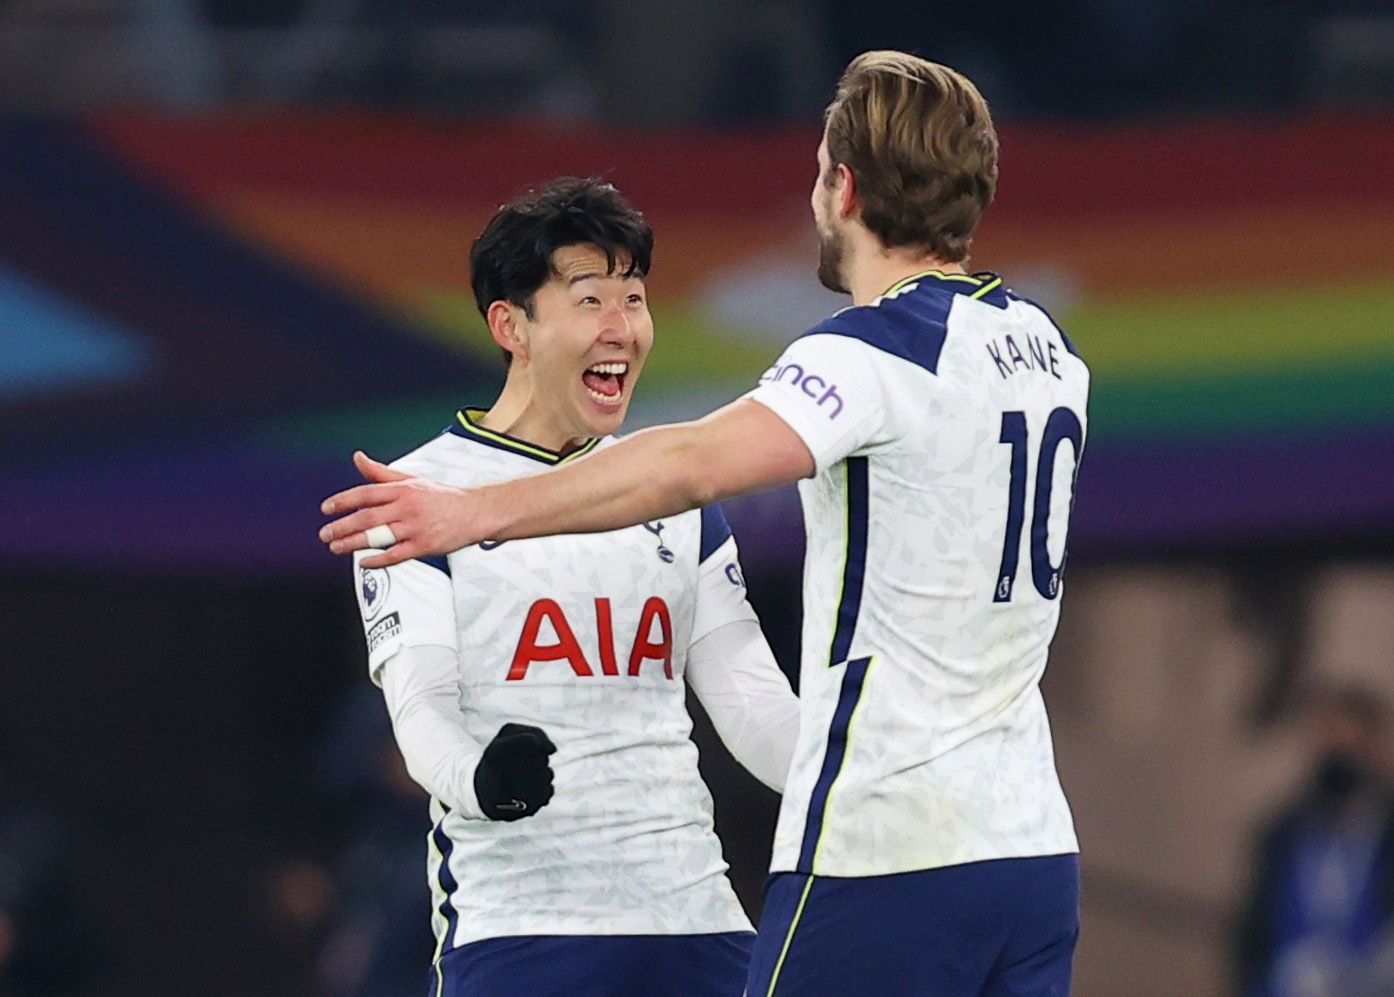 Soccer Football - Premier League - Tottenham Hotspur v Crystal Palace - Tottenham Hotspur Stadium, London, Britain - March 7, 2021 Tottenham Hotspur's Harry Kane celebrates scoring their fourth goal with Son Heung-min Pool via REUTERS/Julian Finney EDITORIAL USE ONLY. No use with unauthorized audio, video, data, fixture lists, club/league logos or 'live' services. Online in-match use limited to 75 images, no video emulation. No use in betting, games or single club /league/player publications. P